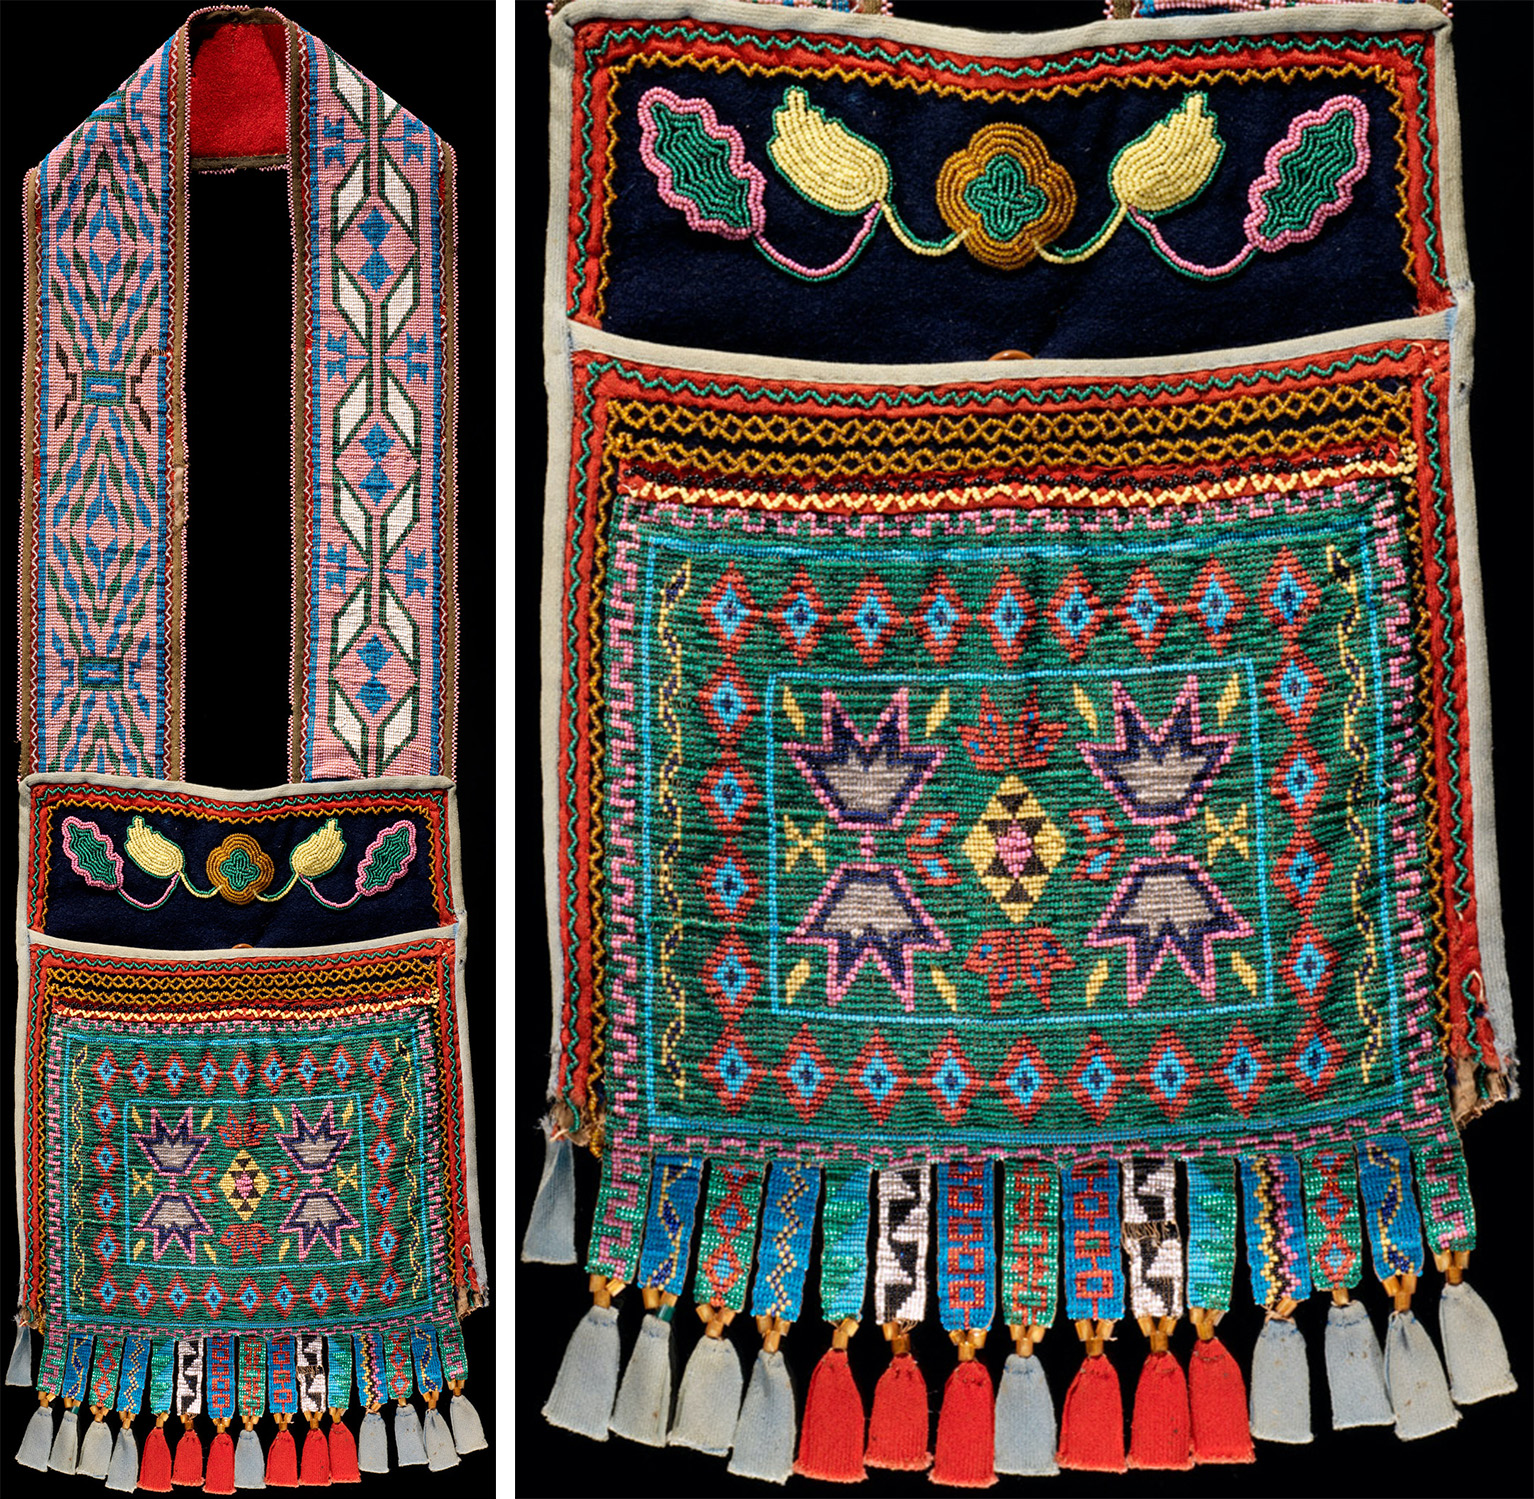 Bandolier Bag, Anishinaabe (Chippewa/Ojibwe), c. 1870, Upper Great Lakes, wool, cotton cloth, and glass beads. 87 x 26 cm (National Museum of the American Indian, New York)